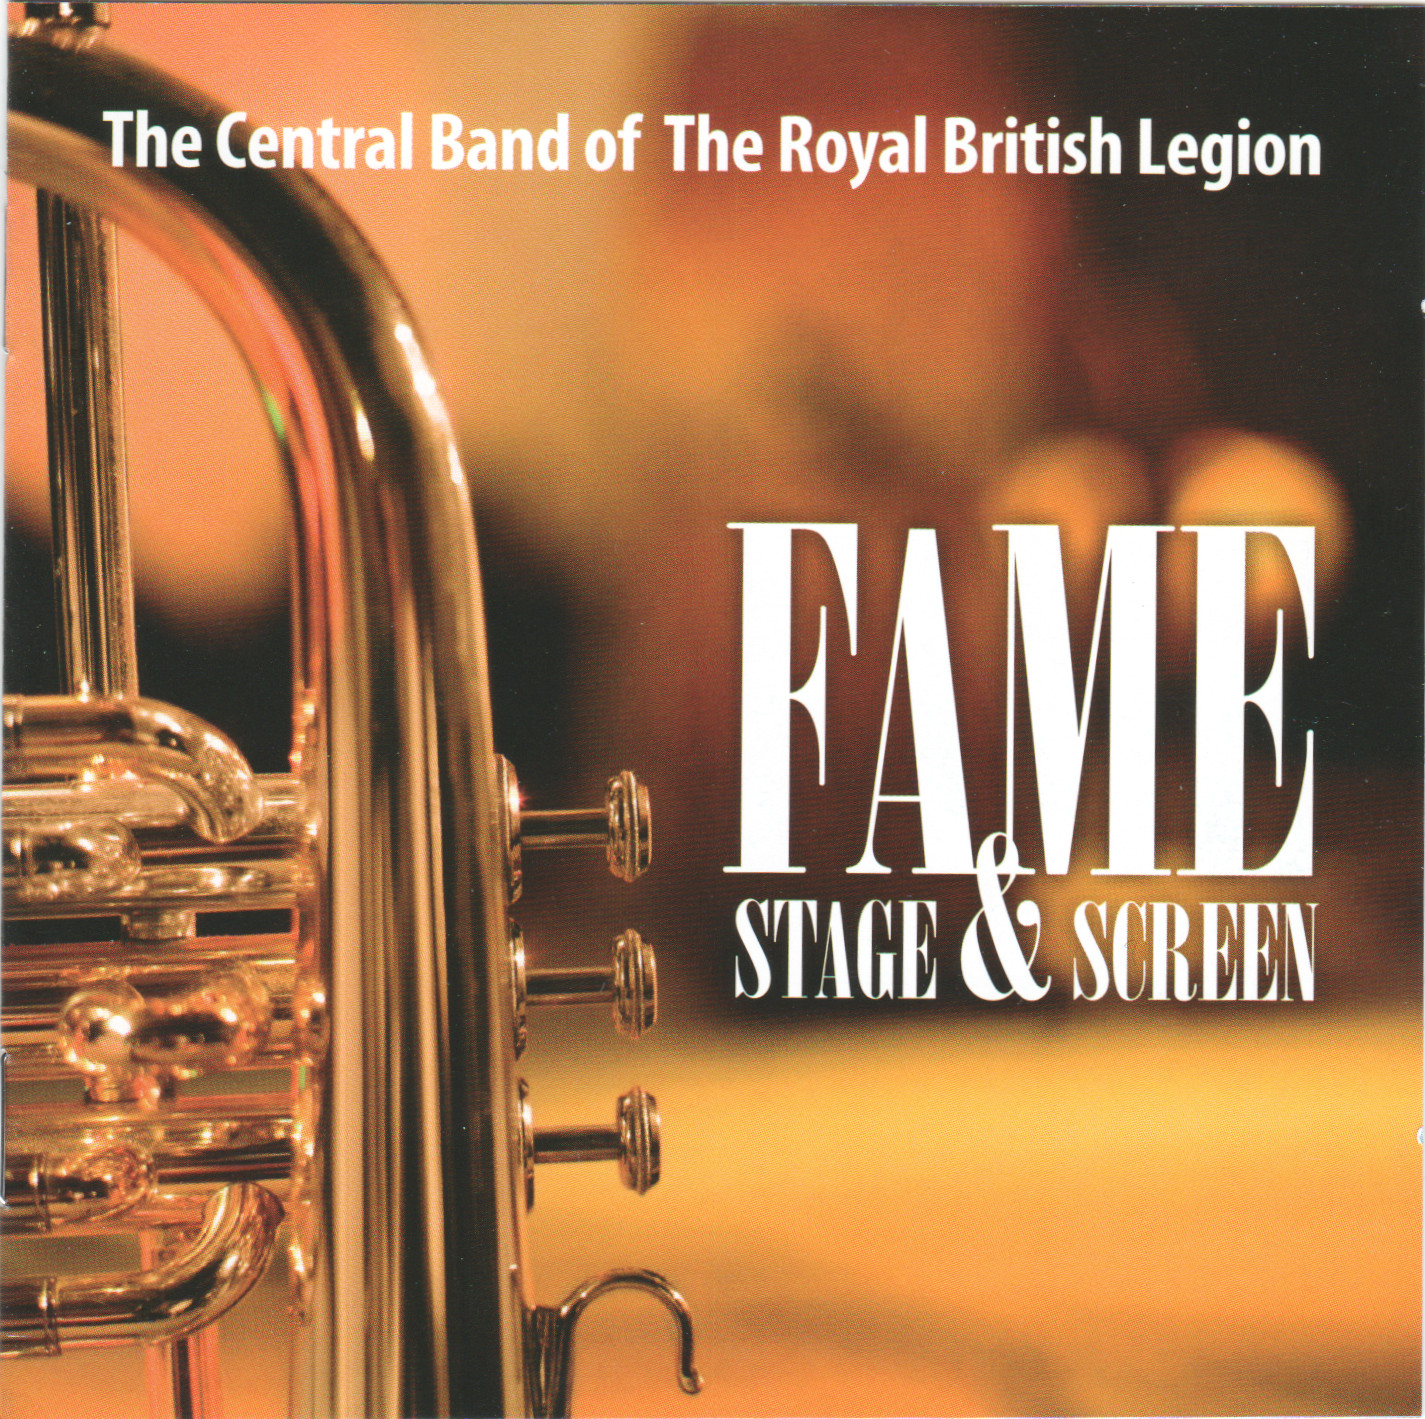 Image of Brass Instrument on CD cover